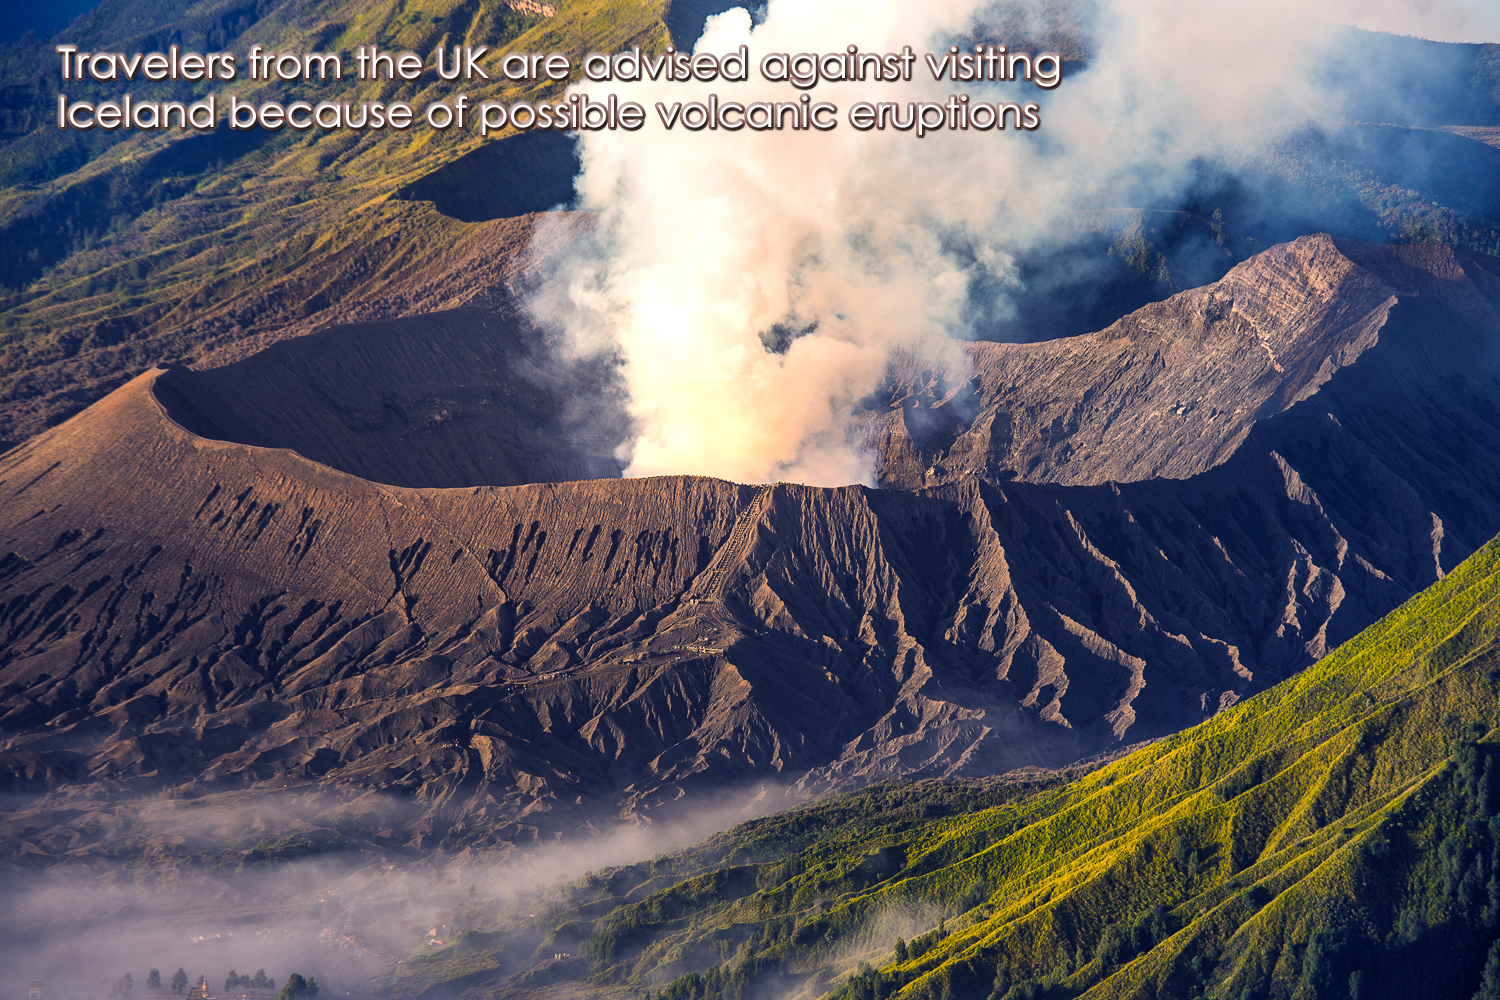 Travelers from the UK are advised against visiting Iceland because of possible volcanic eruptions.